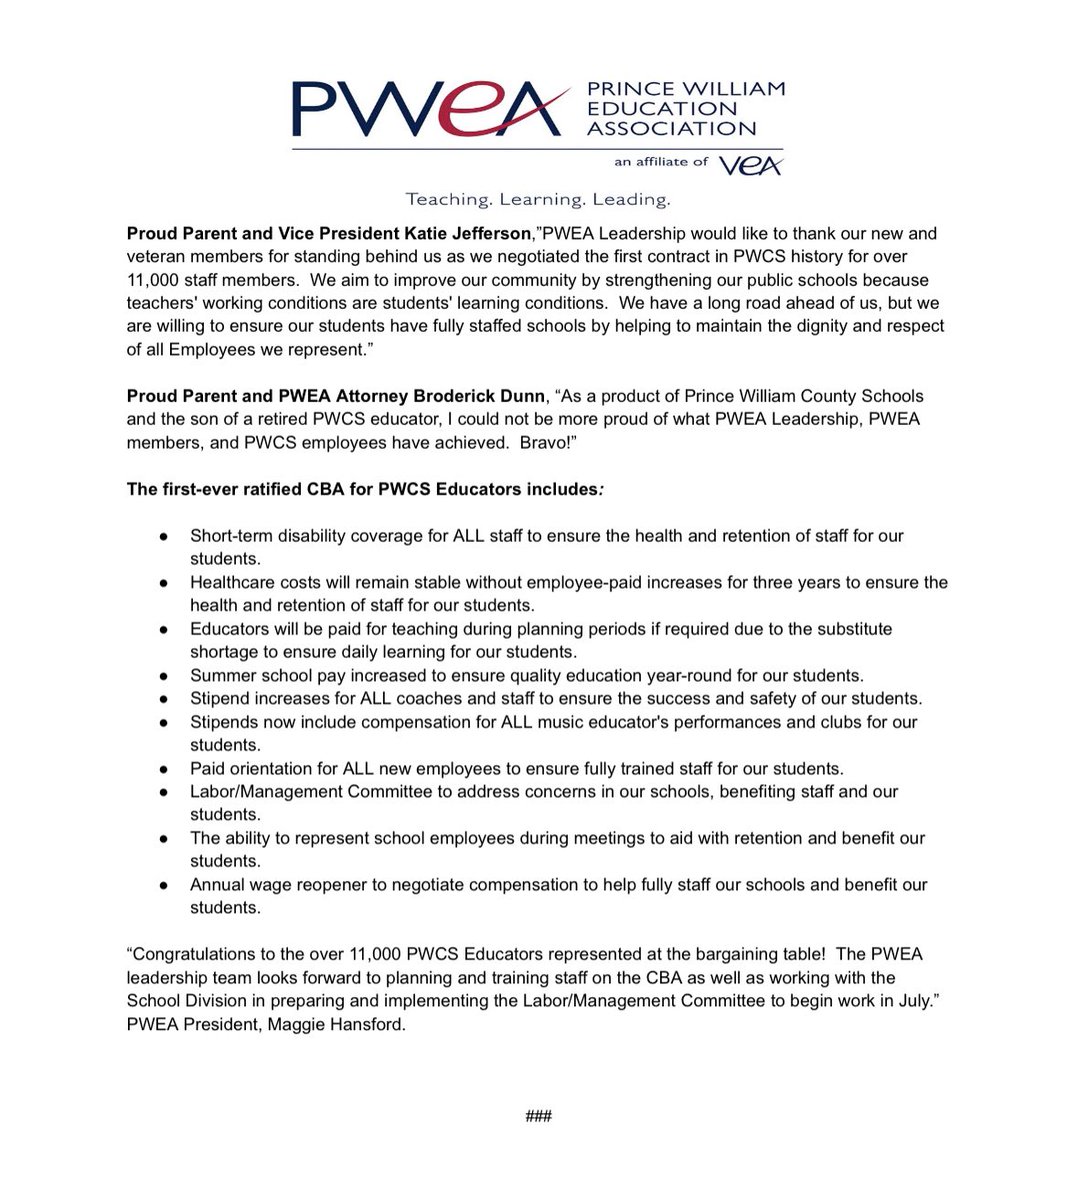 PWEA Leadership, the largest public-sector education local representing over 11,000 educators in Prince William County Schools (PWCS), is proud to announce our membership has ratified the first and strongest Collective Bargaining Agreement (CBA) in Virginia history for Educators.